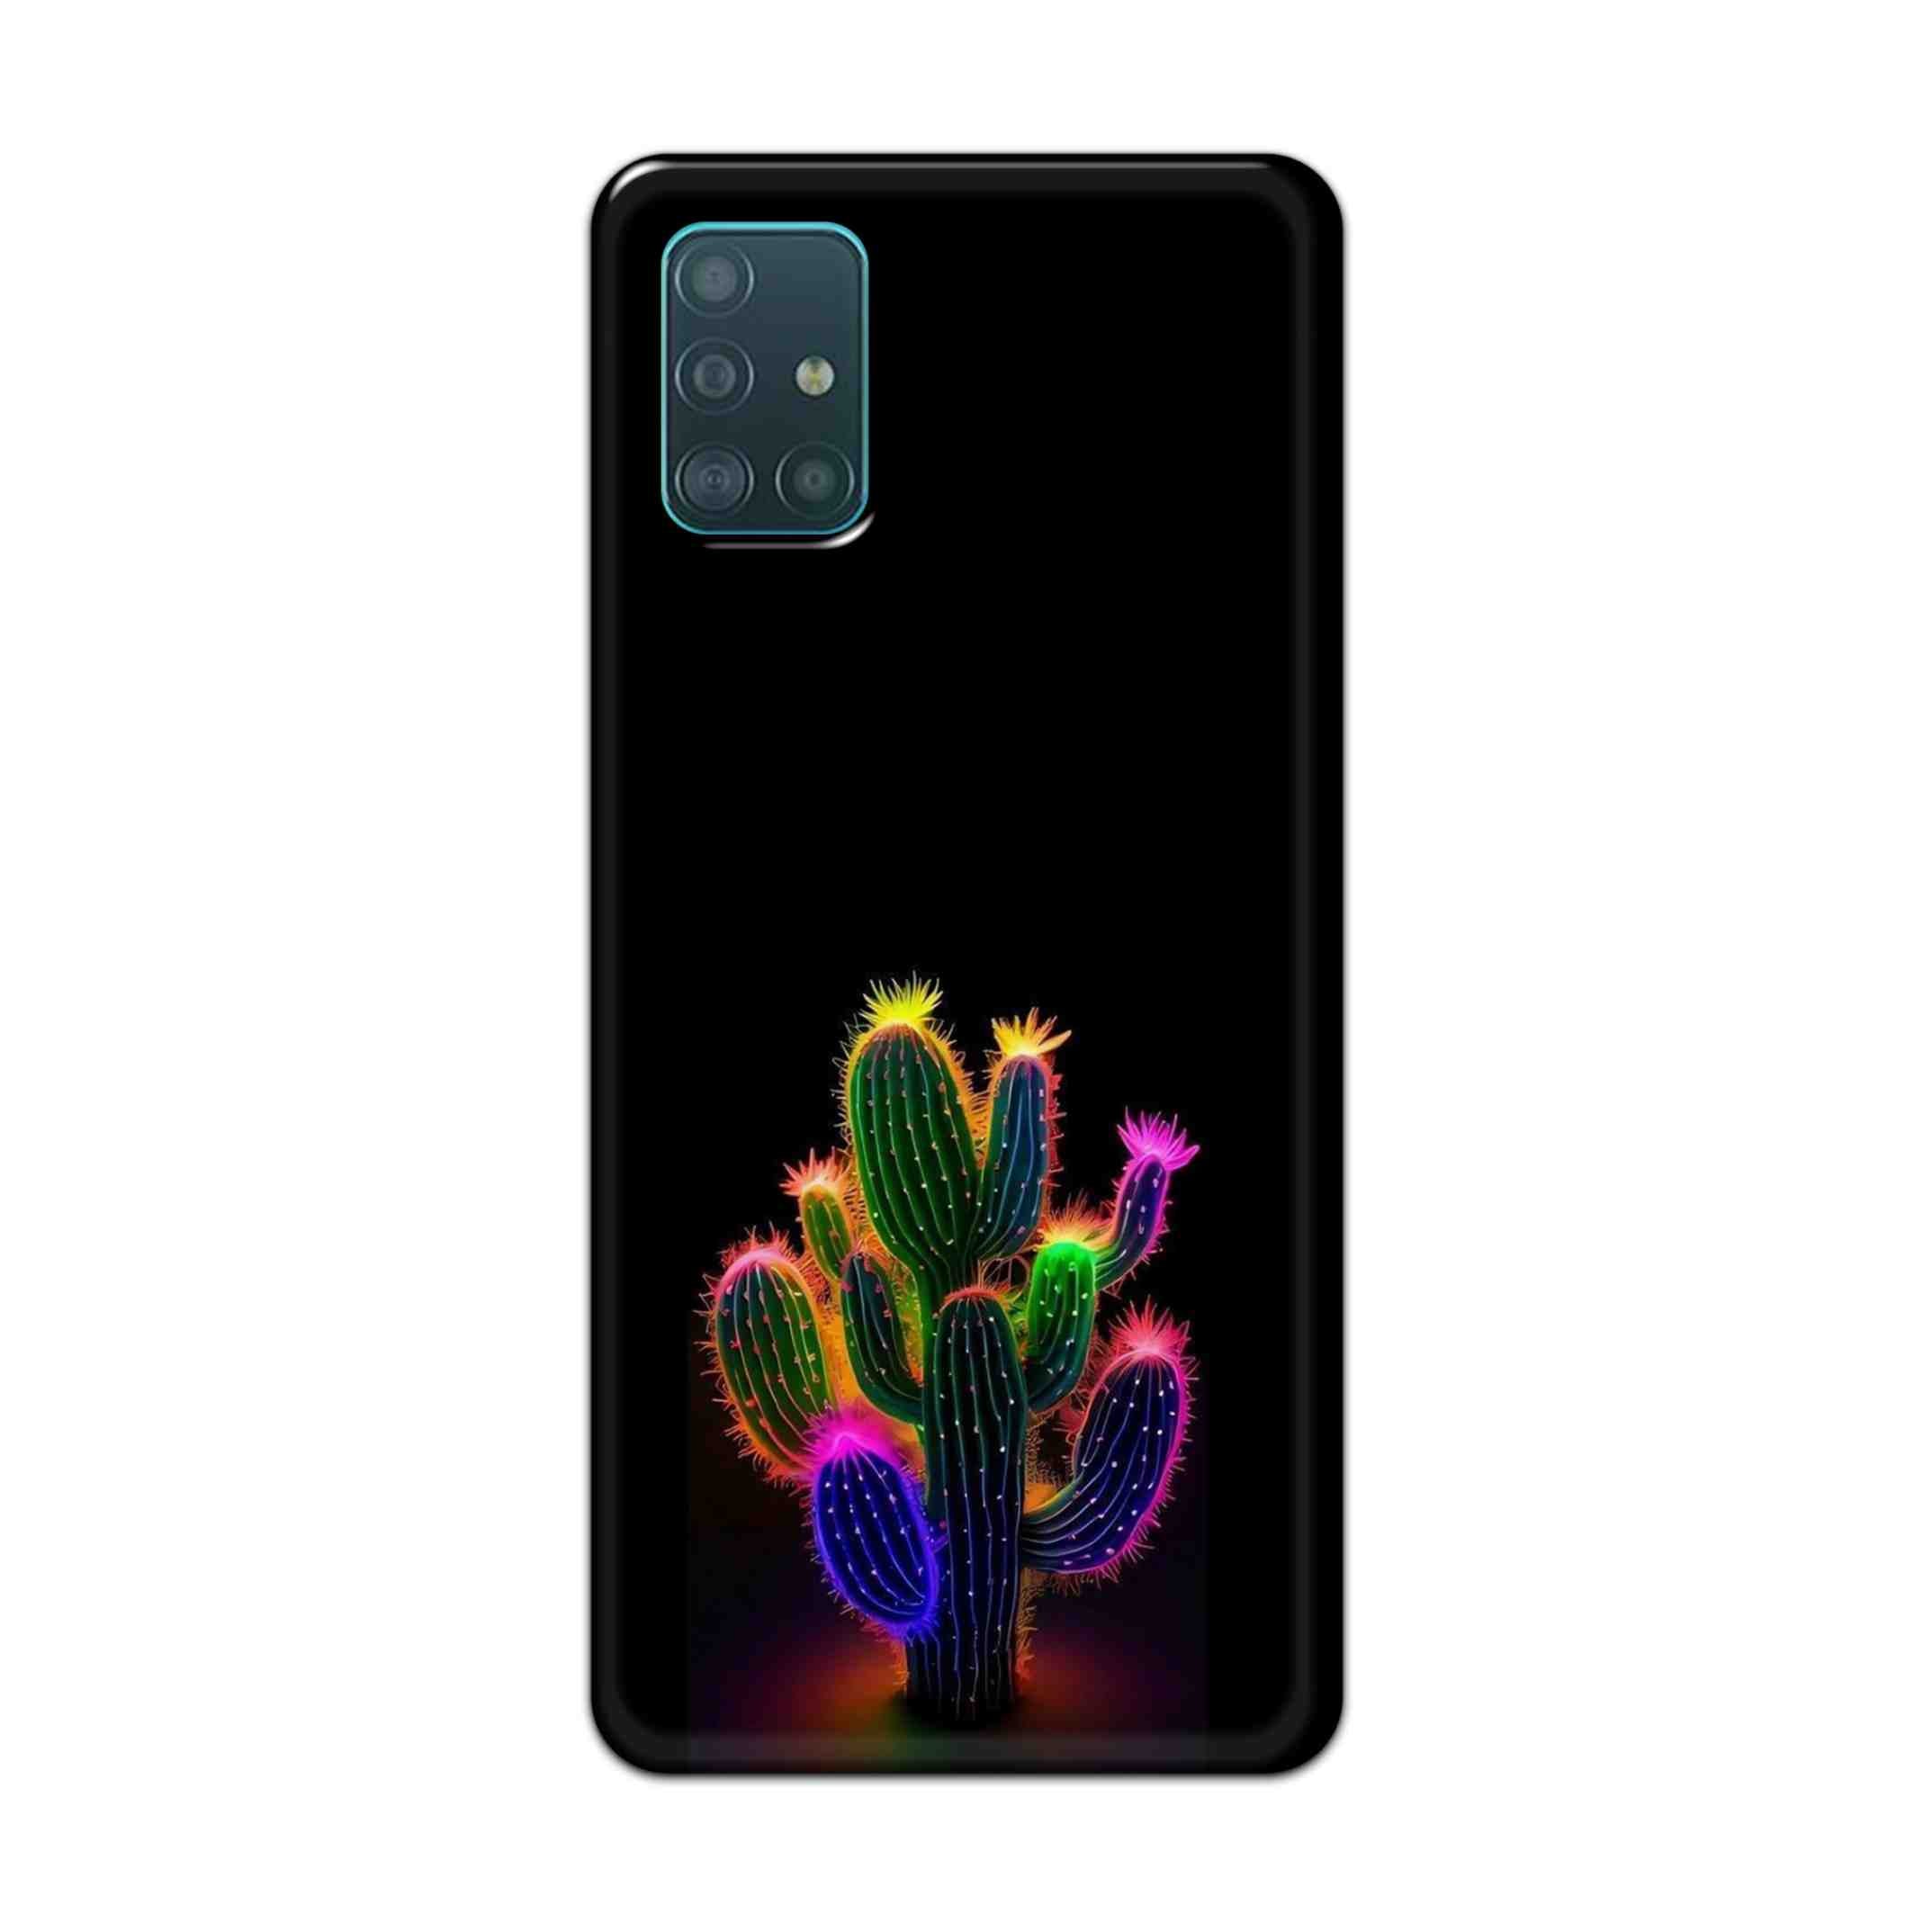 Buy Neon Flower Hard Back Mobile Phone Case Cover For Samsung A51 Online